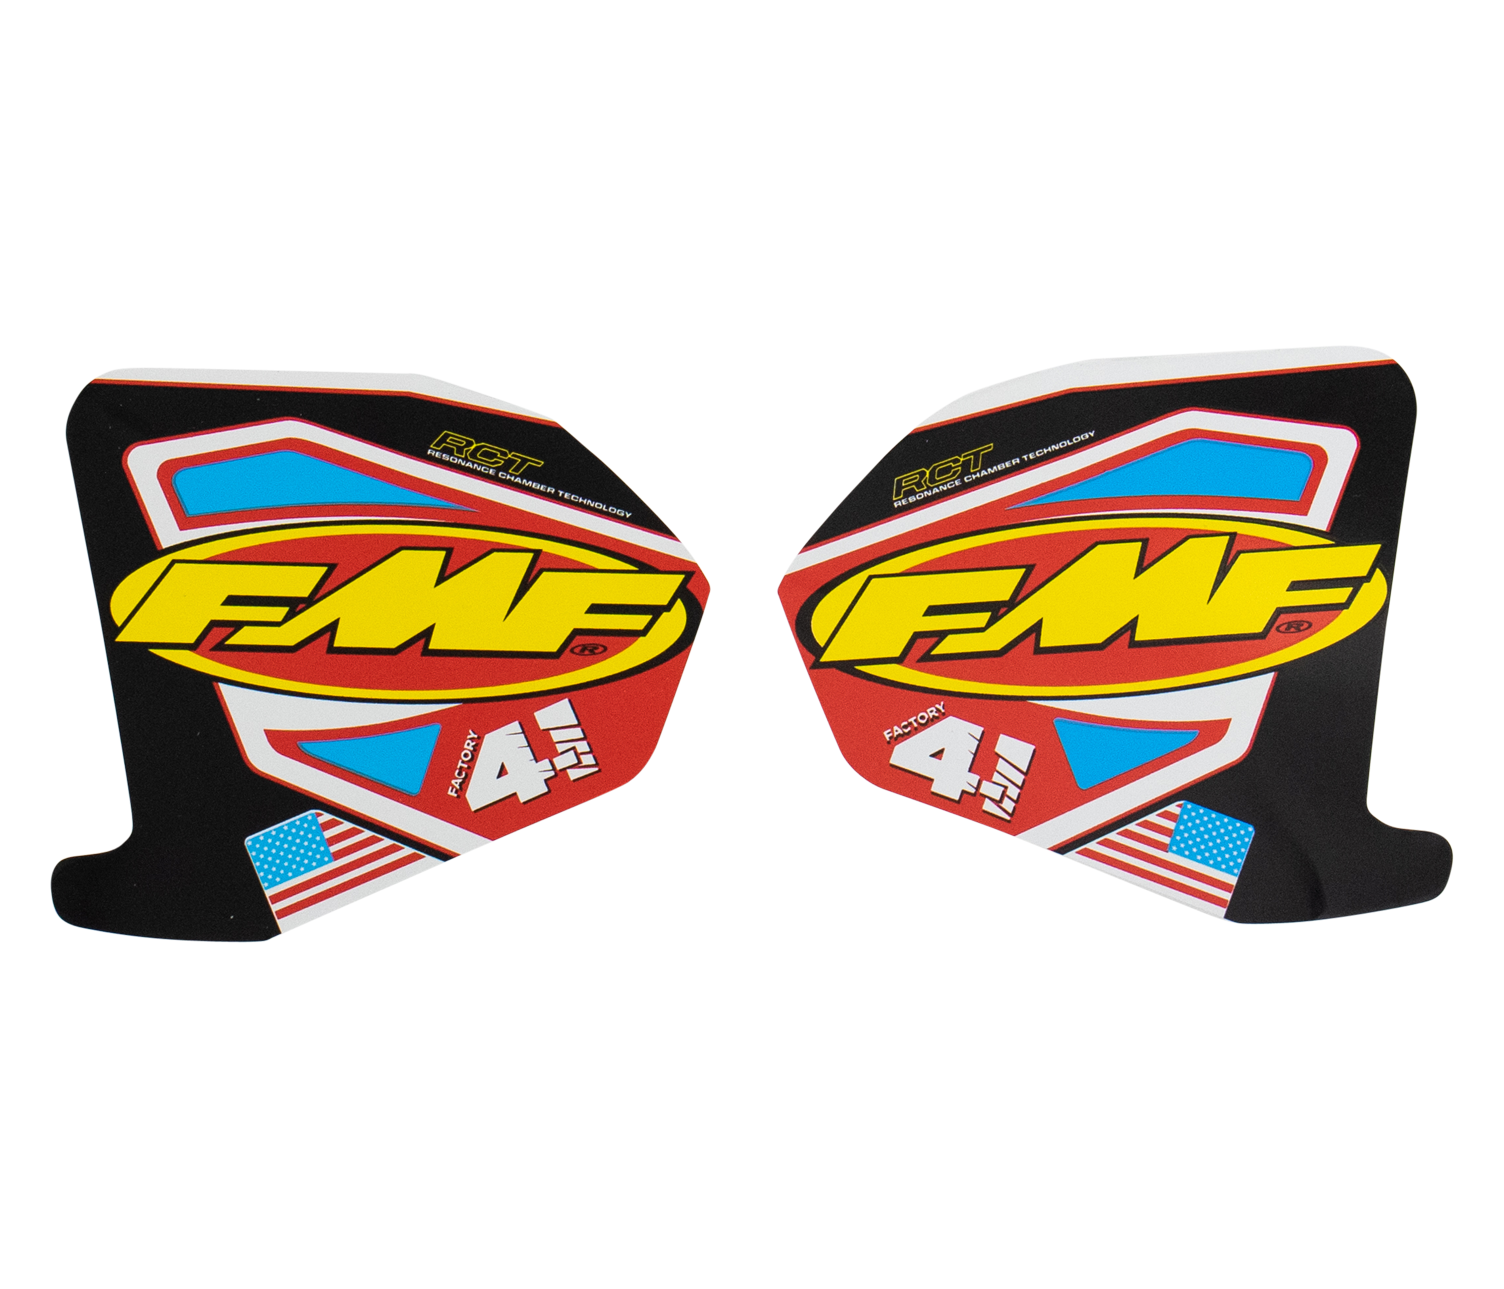 FMF FCTRY 4.1 MINI REPLACEMENT WRAP DECAL